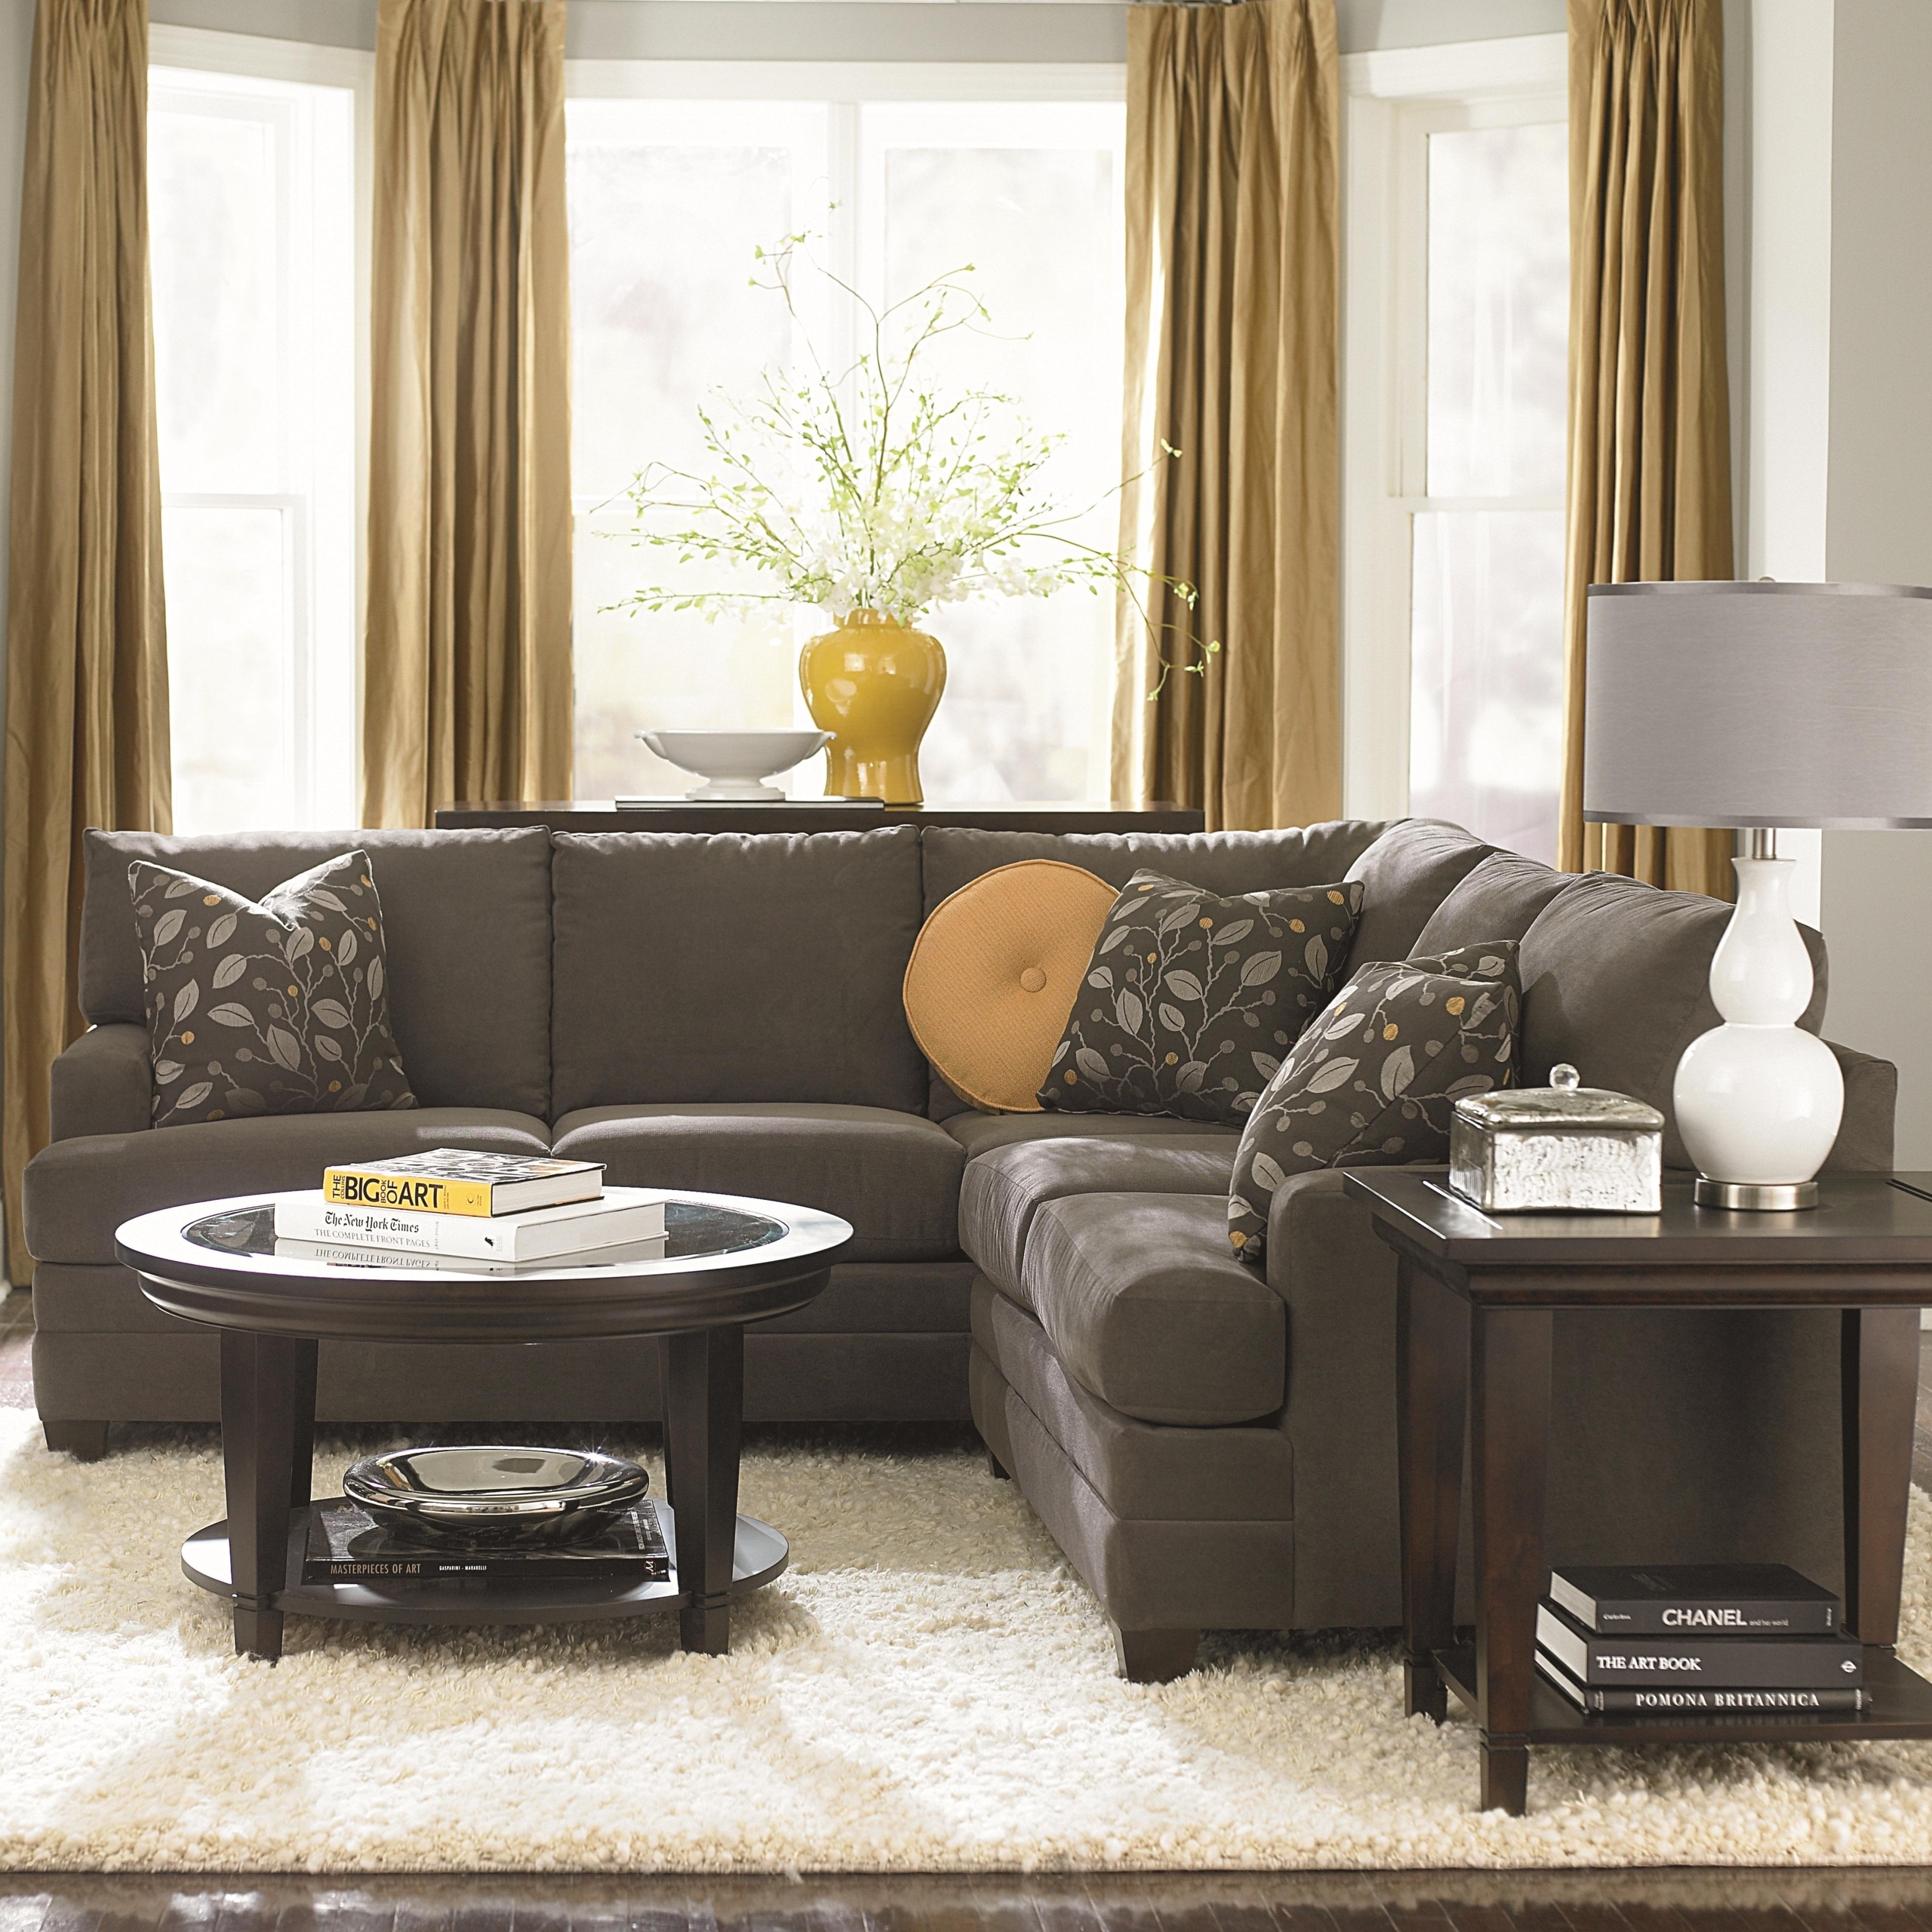 Charcoal Gray Sectional Sofa Ideas On Foter